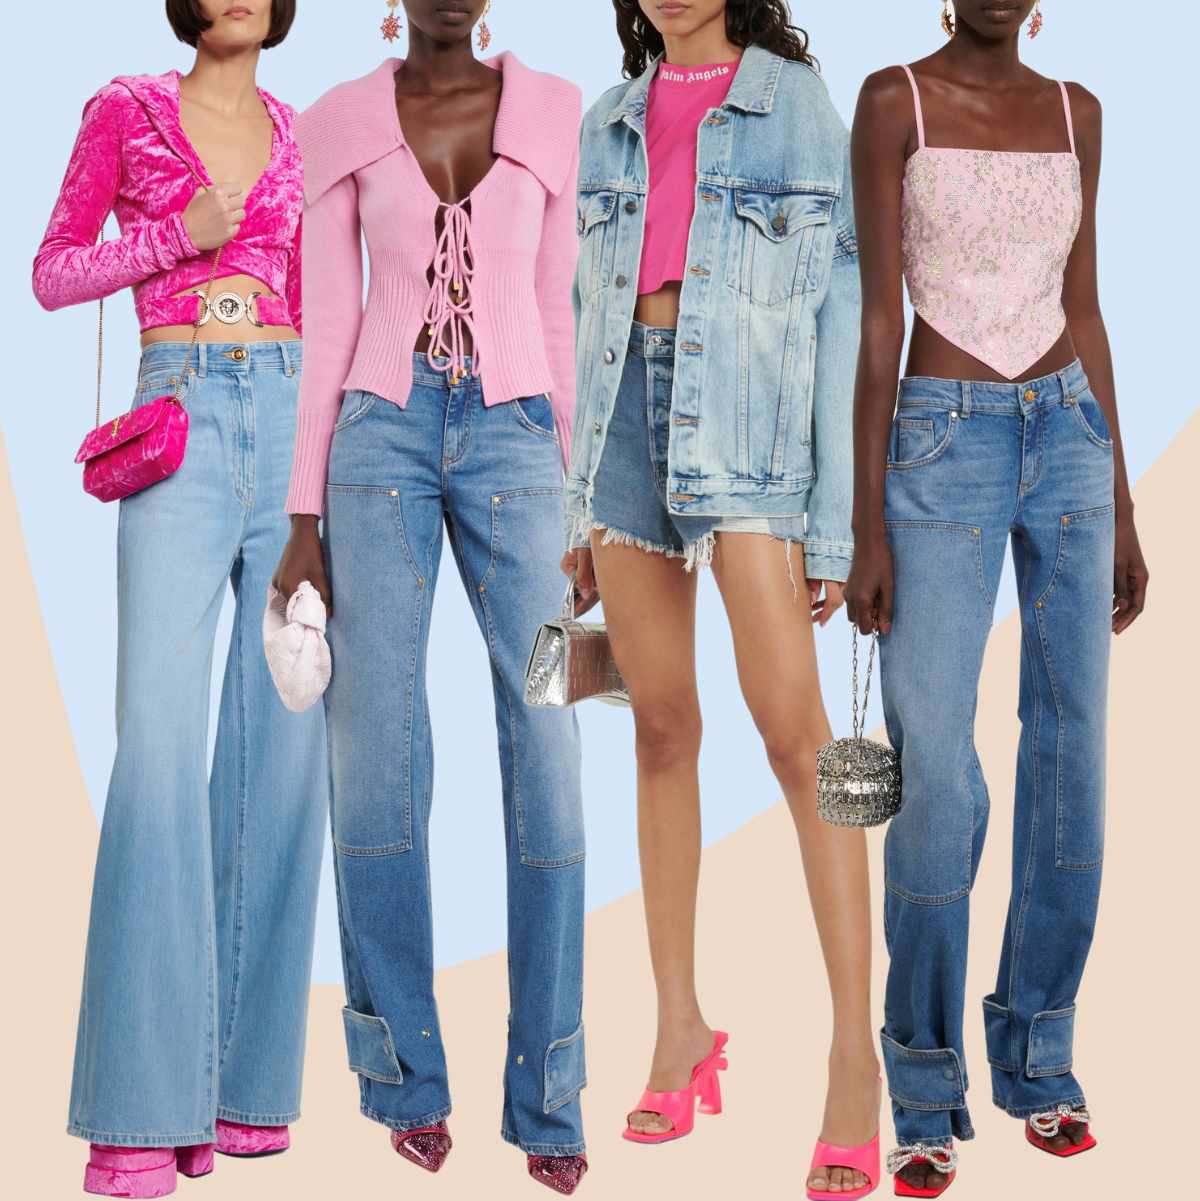 Collage of 5 women wearing Barbie core fashion shoes with denim outfits.